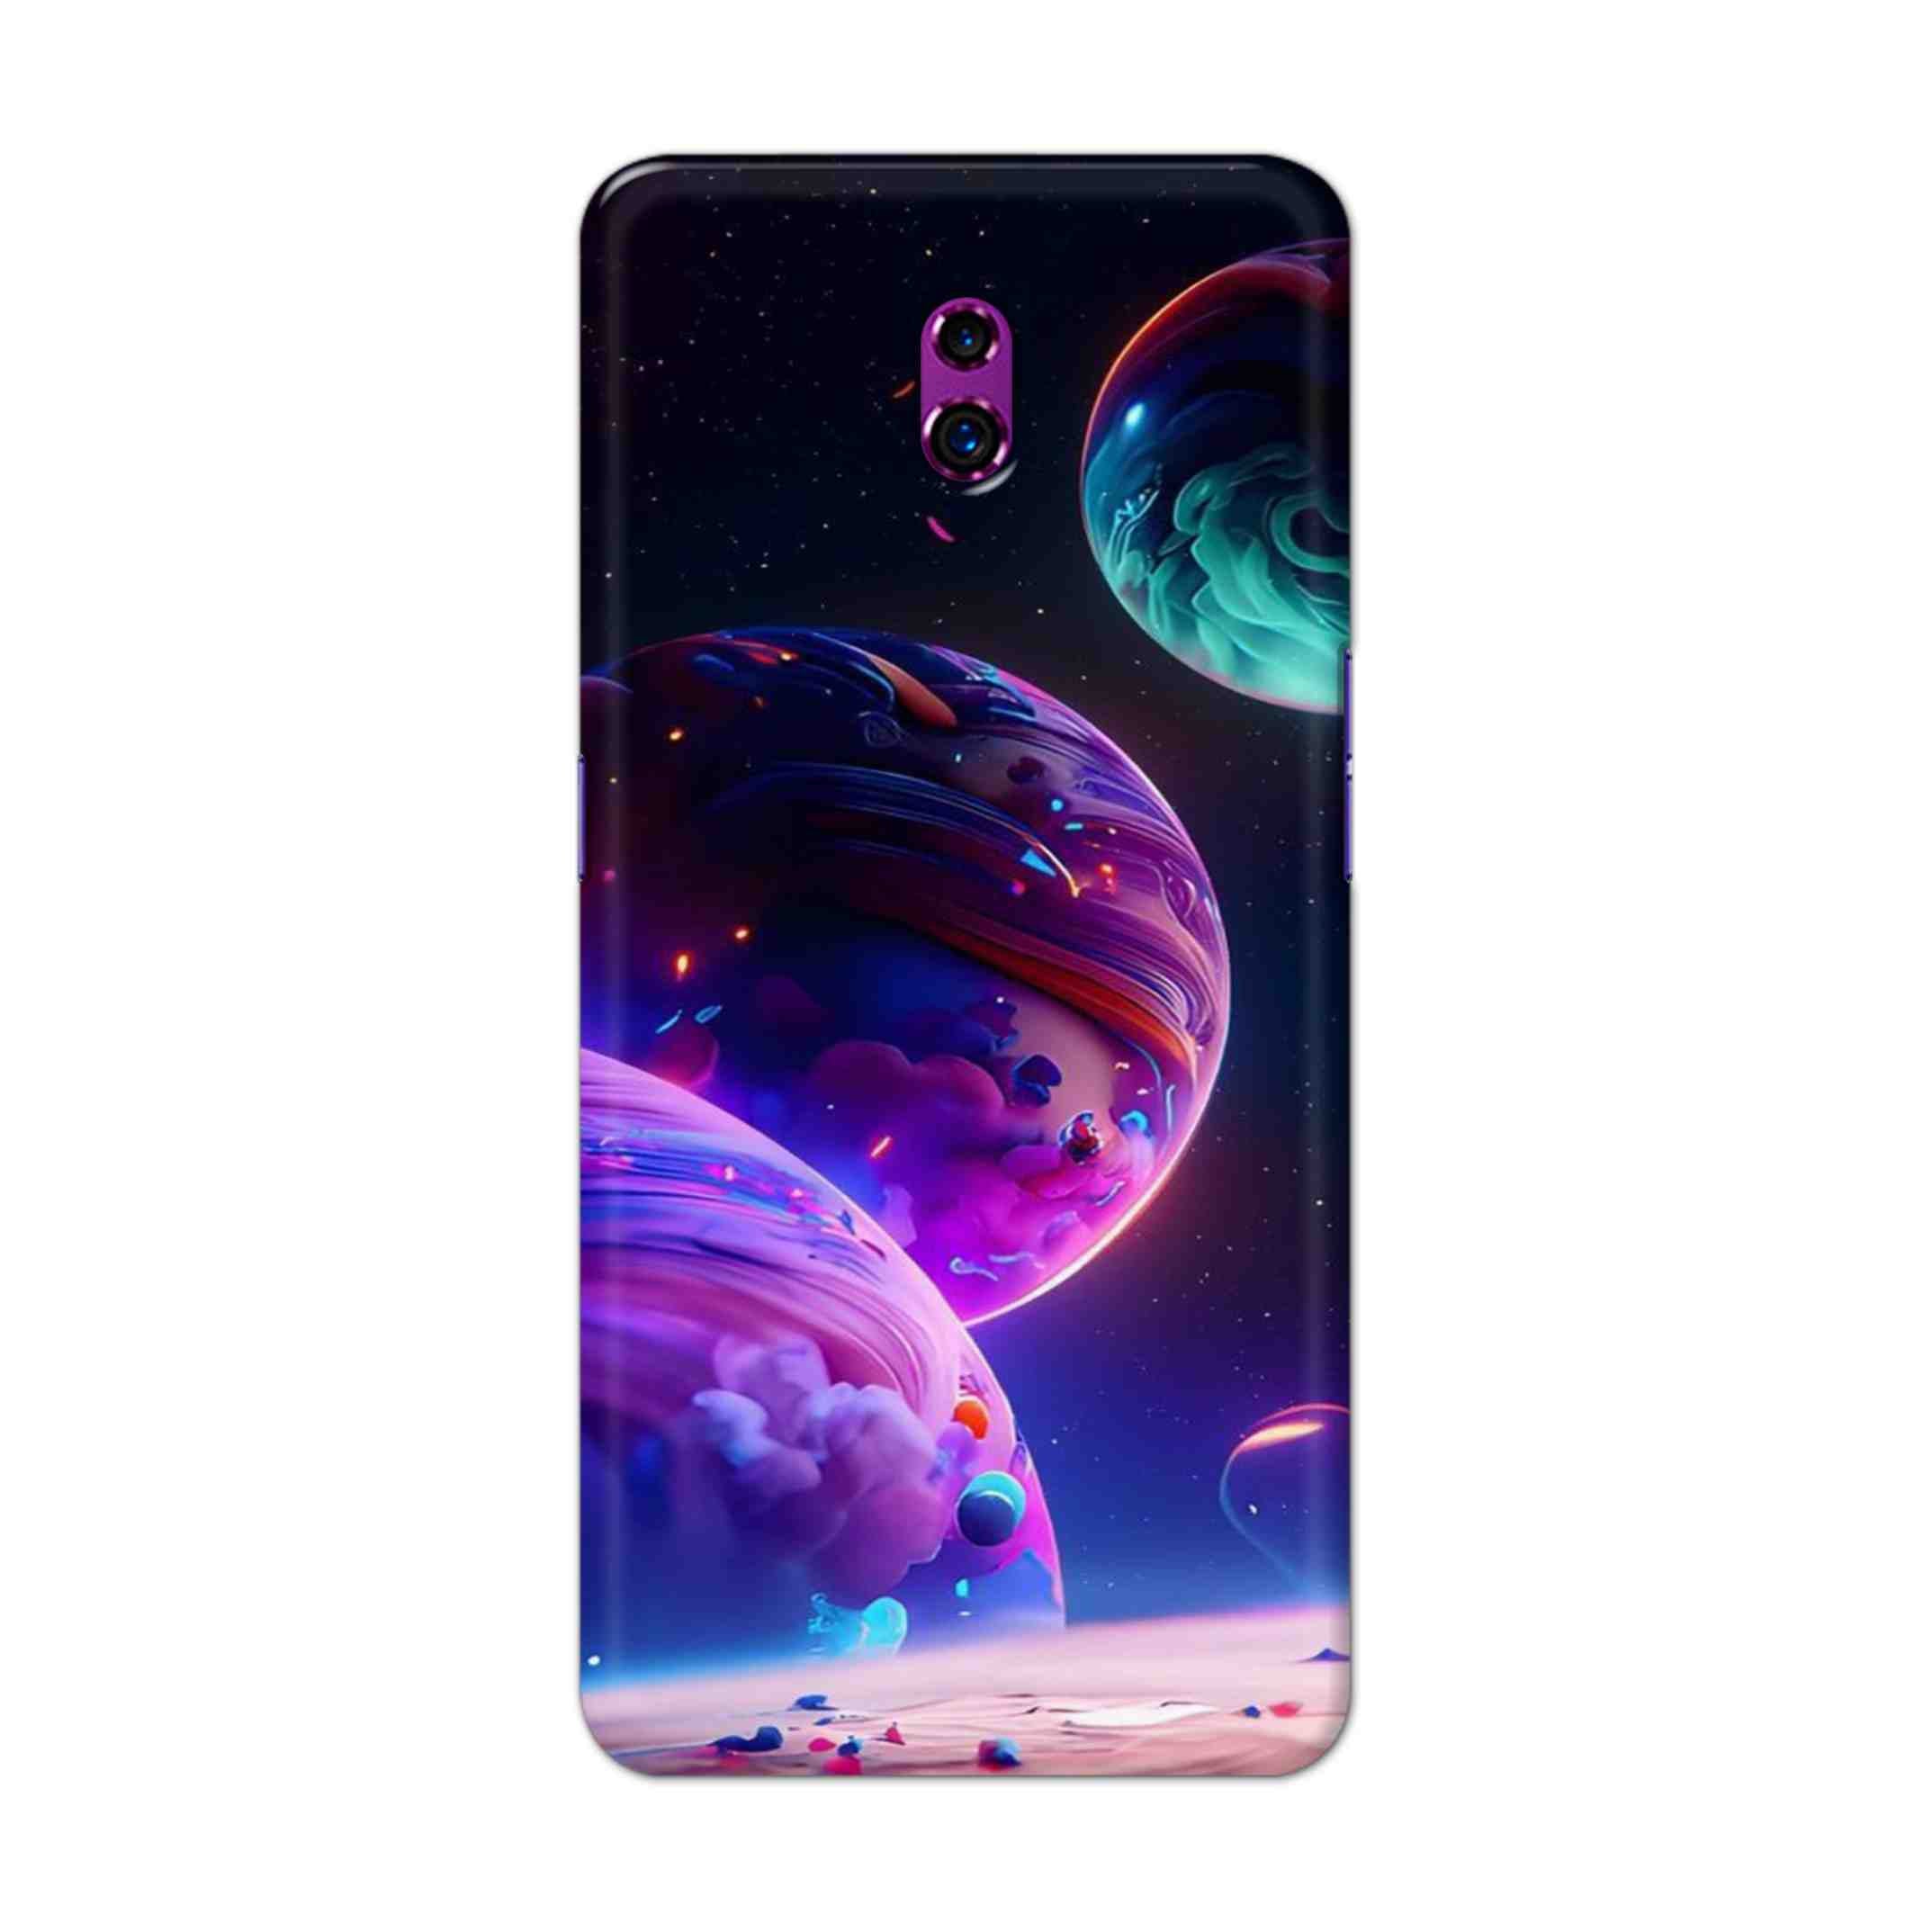 Buy 3 Earth Hard Back Mobile Phone Case Cover For Oppo Reno Online